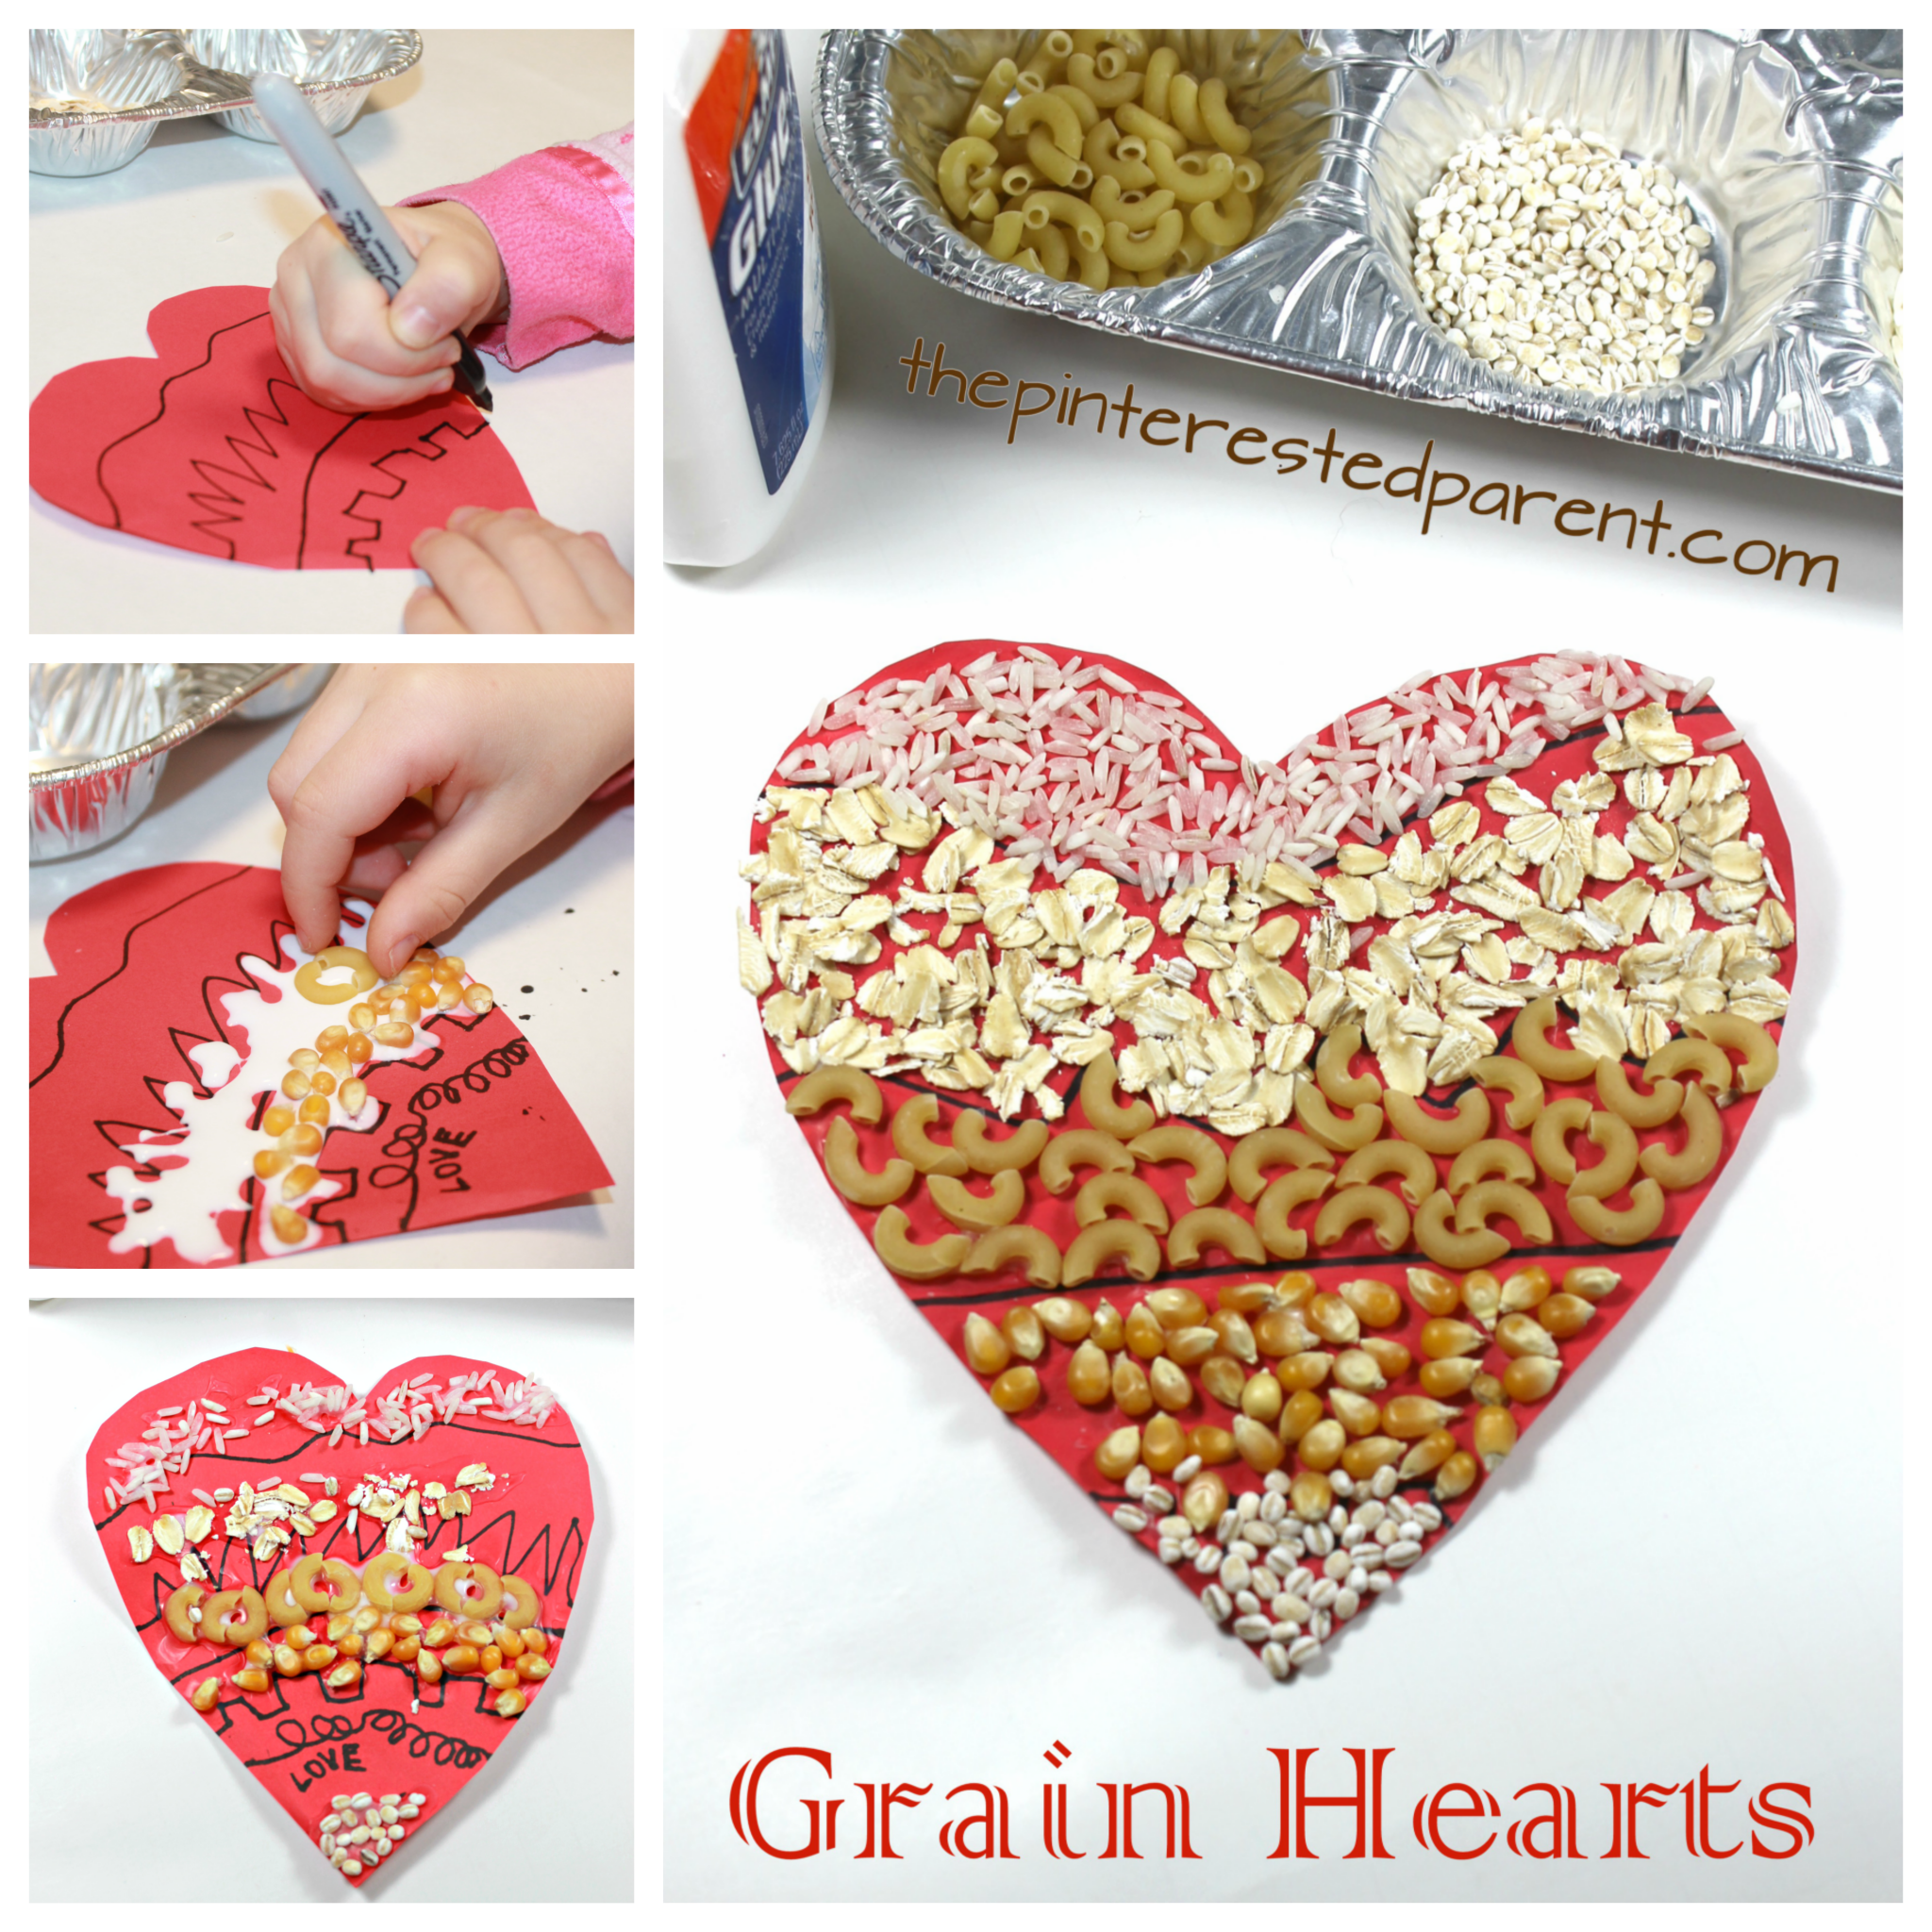 Hearts made with grains. Perfect for Valentine's day. Use rice, oats, pasta, barley, popcorn kernels. Arts and crafts for kids & preschoolers